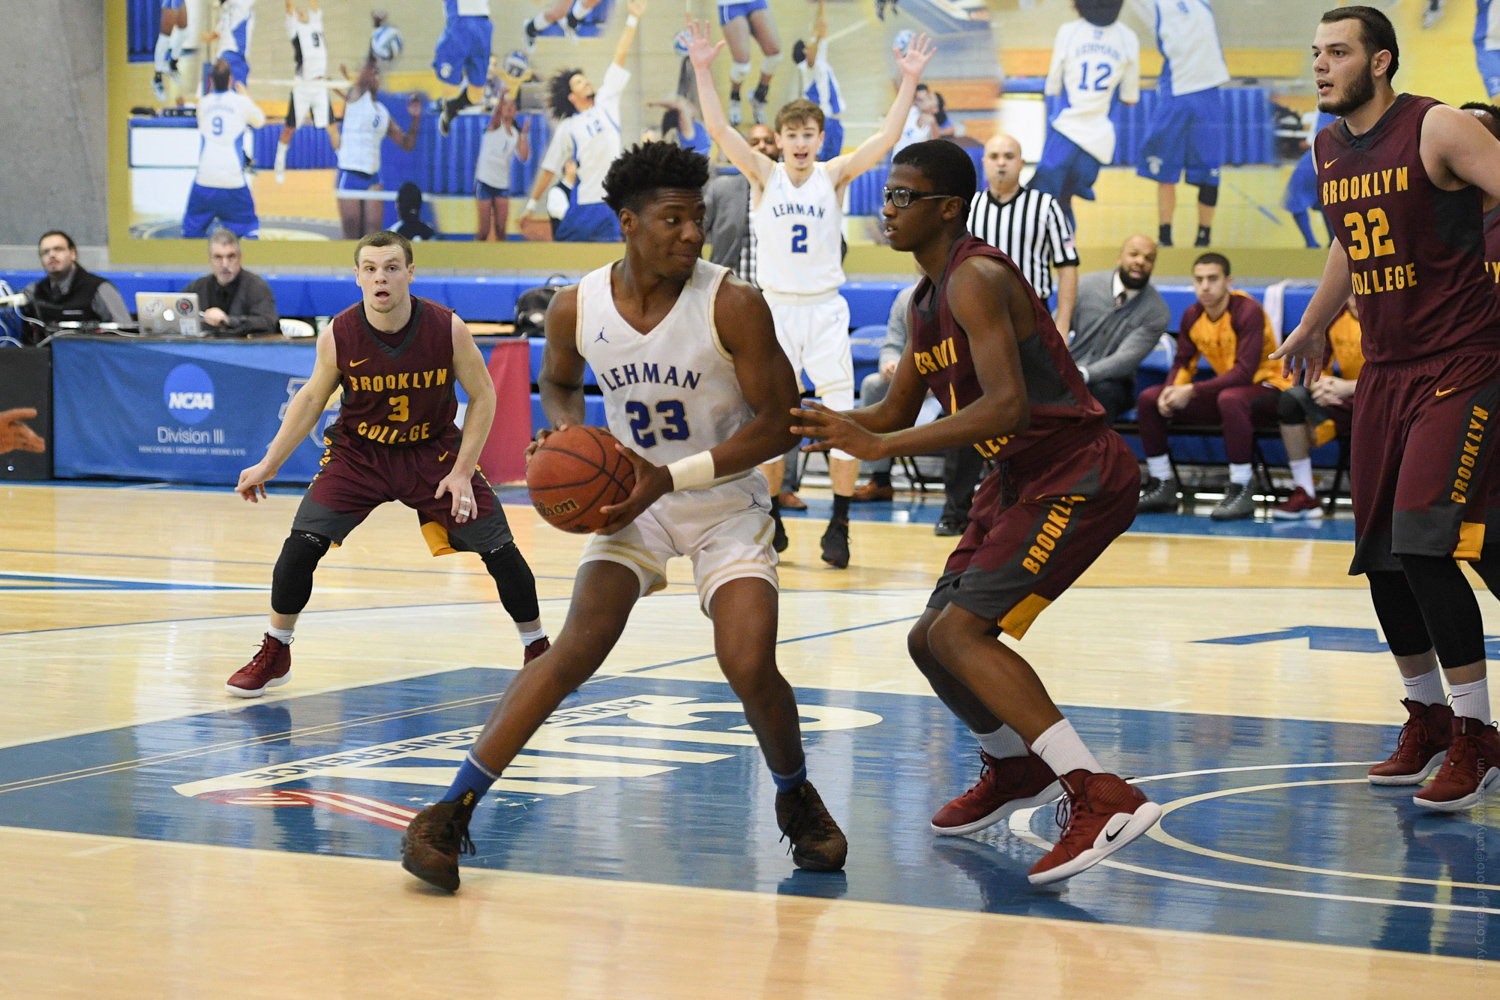 Lehman College junior Isaiah Geathers scored six of his 15 points in overtime in the Lightning’s three-point win over Keystone College last week.